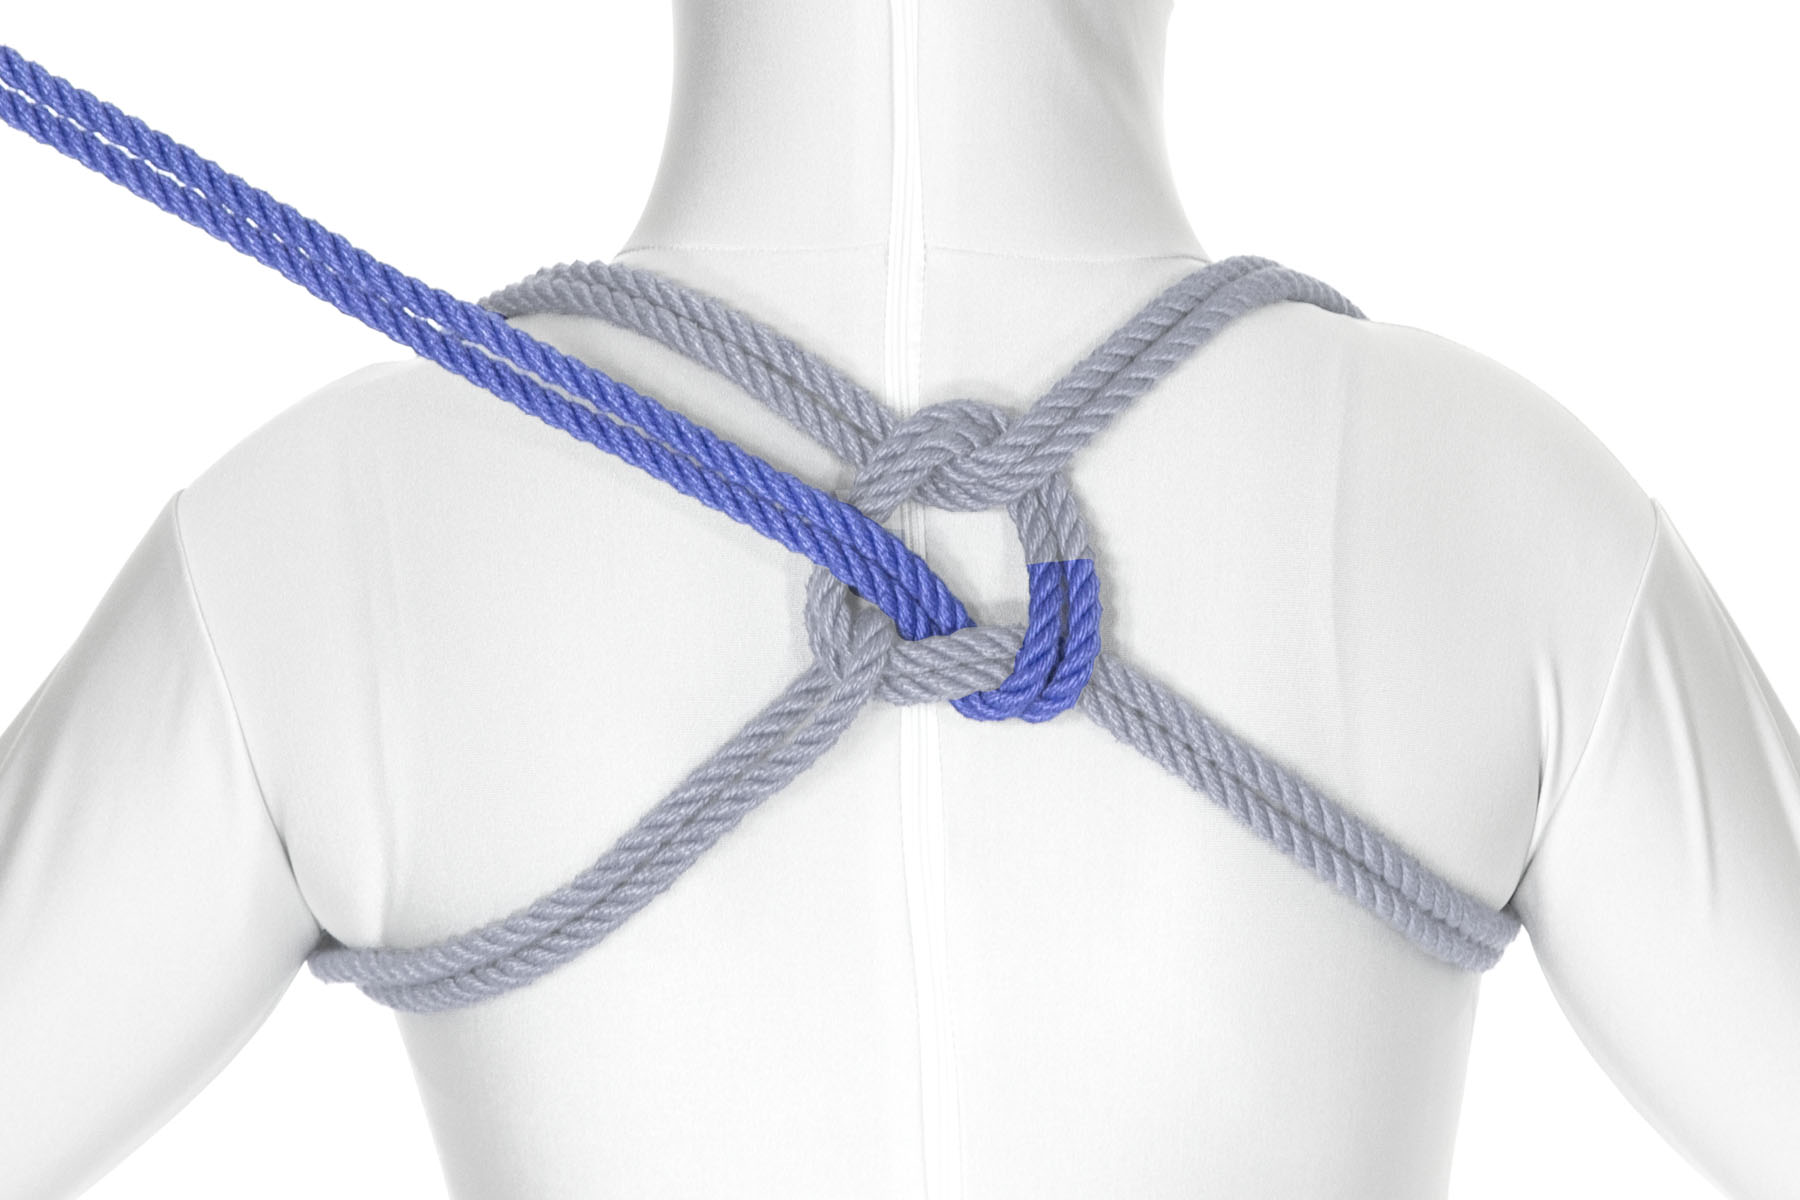 The tail of the rope ties a half hitch, securing the whole harness together. To do this, it first crosses over the rope in the lower right quadrant, making a small circle of rope at the center point of the harness. It then goes under the rope in the lower right quadrant and then up through the circle before being pulled taut.